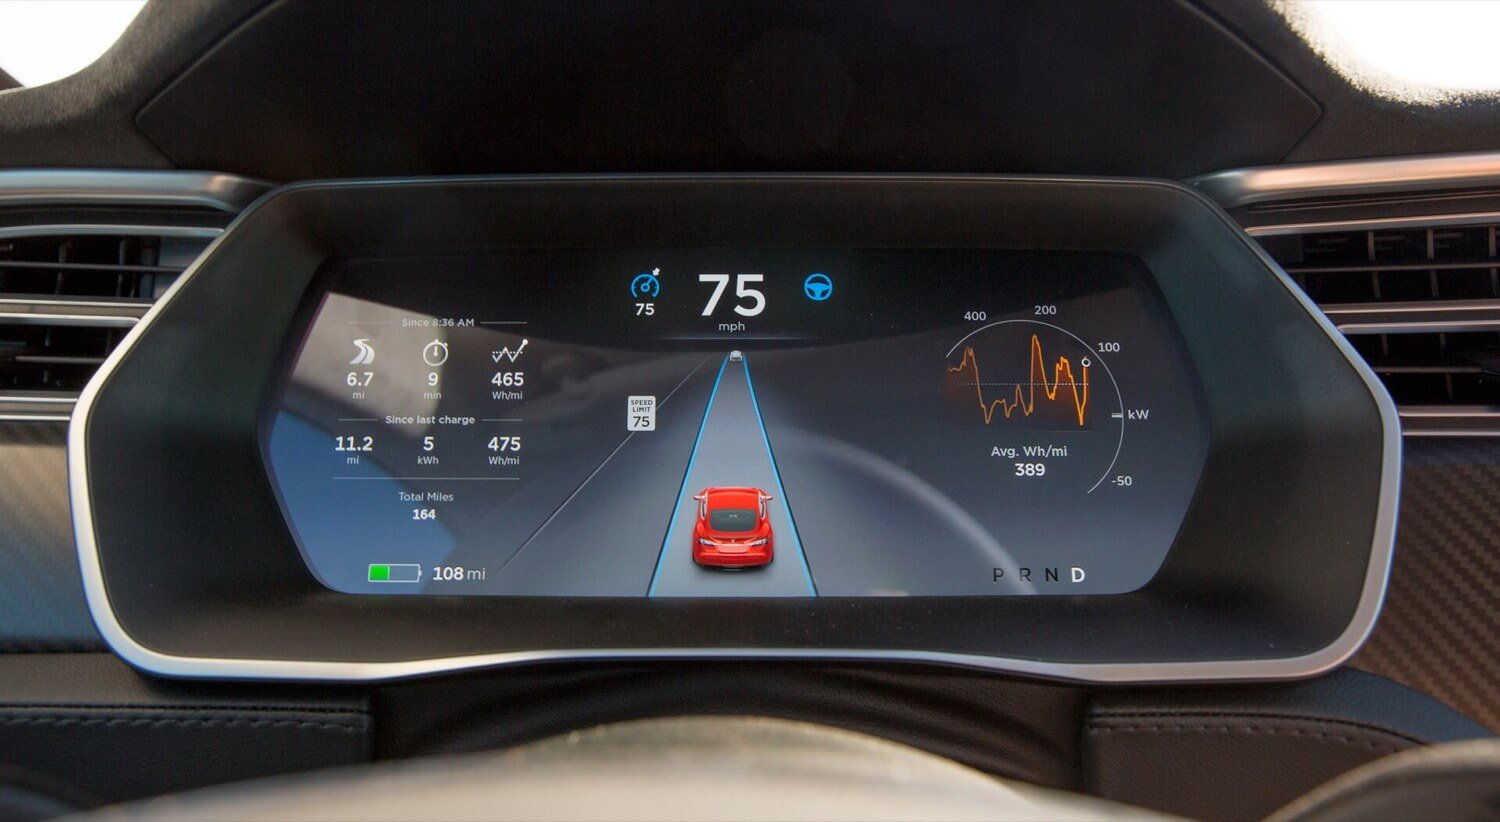 The obtained data of the autopilot Tesla Model S that crashed on a fire truck